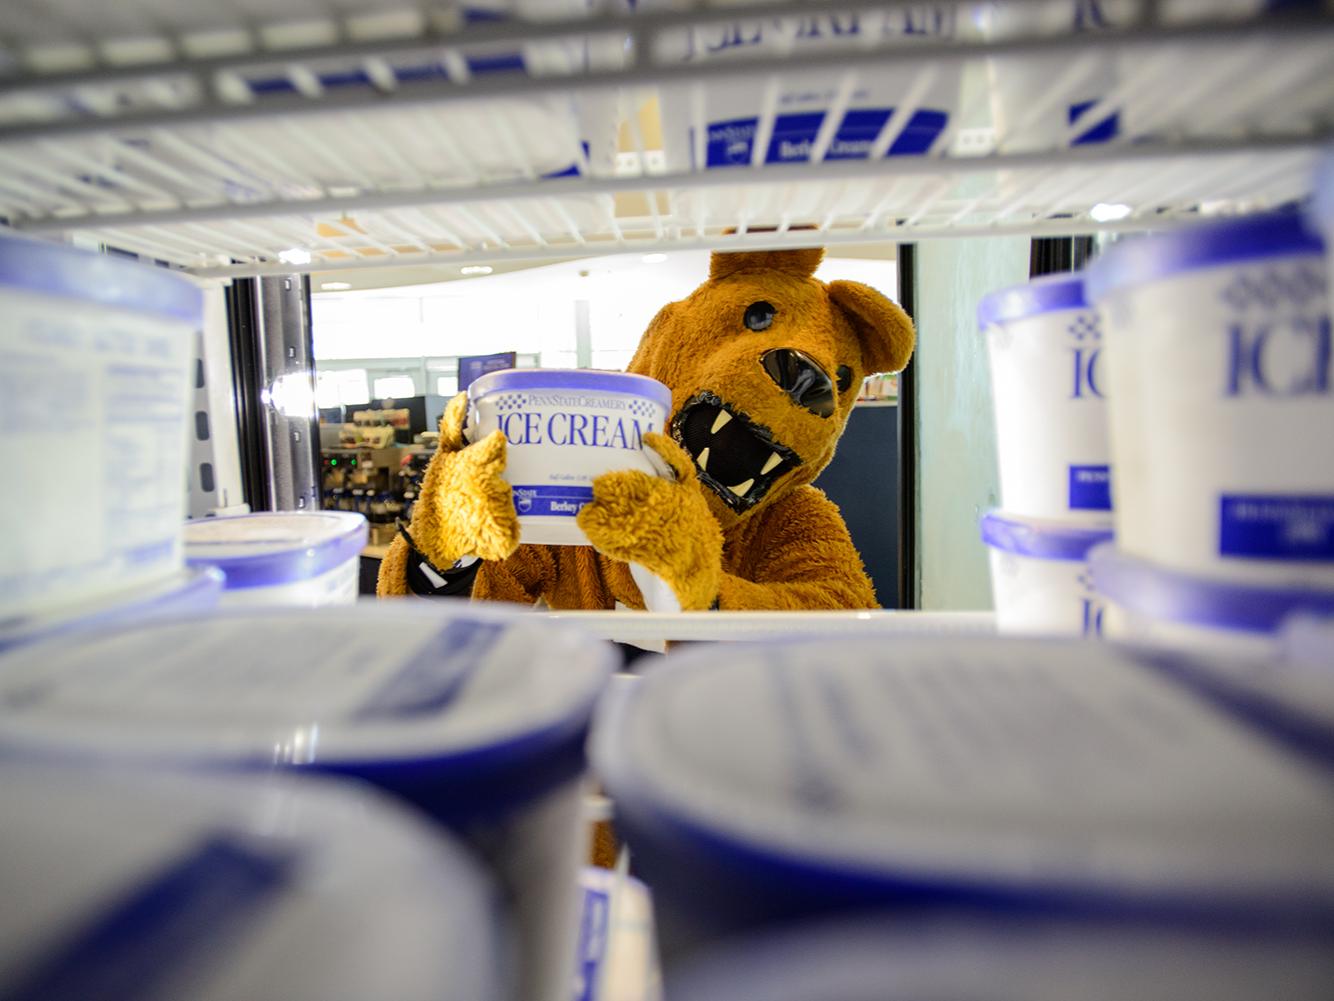 The Nittany Lion loads ice cream into a freezer